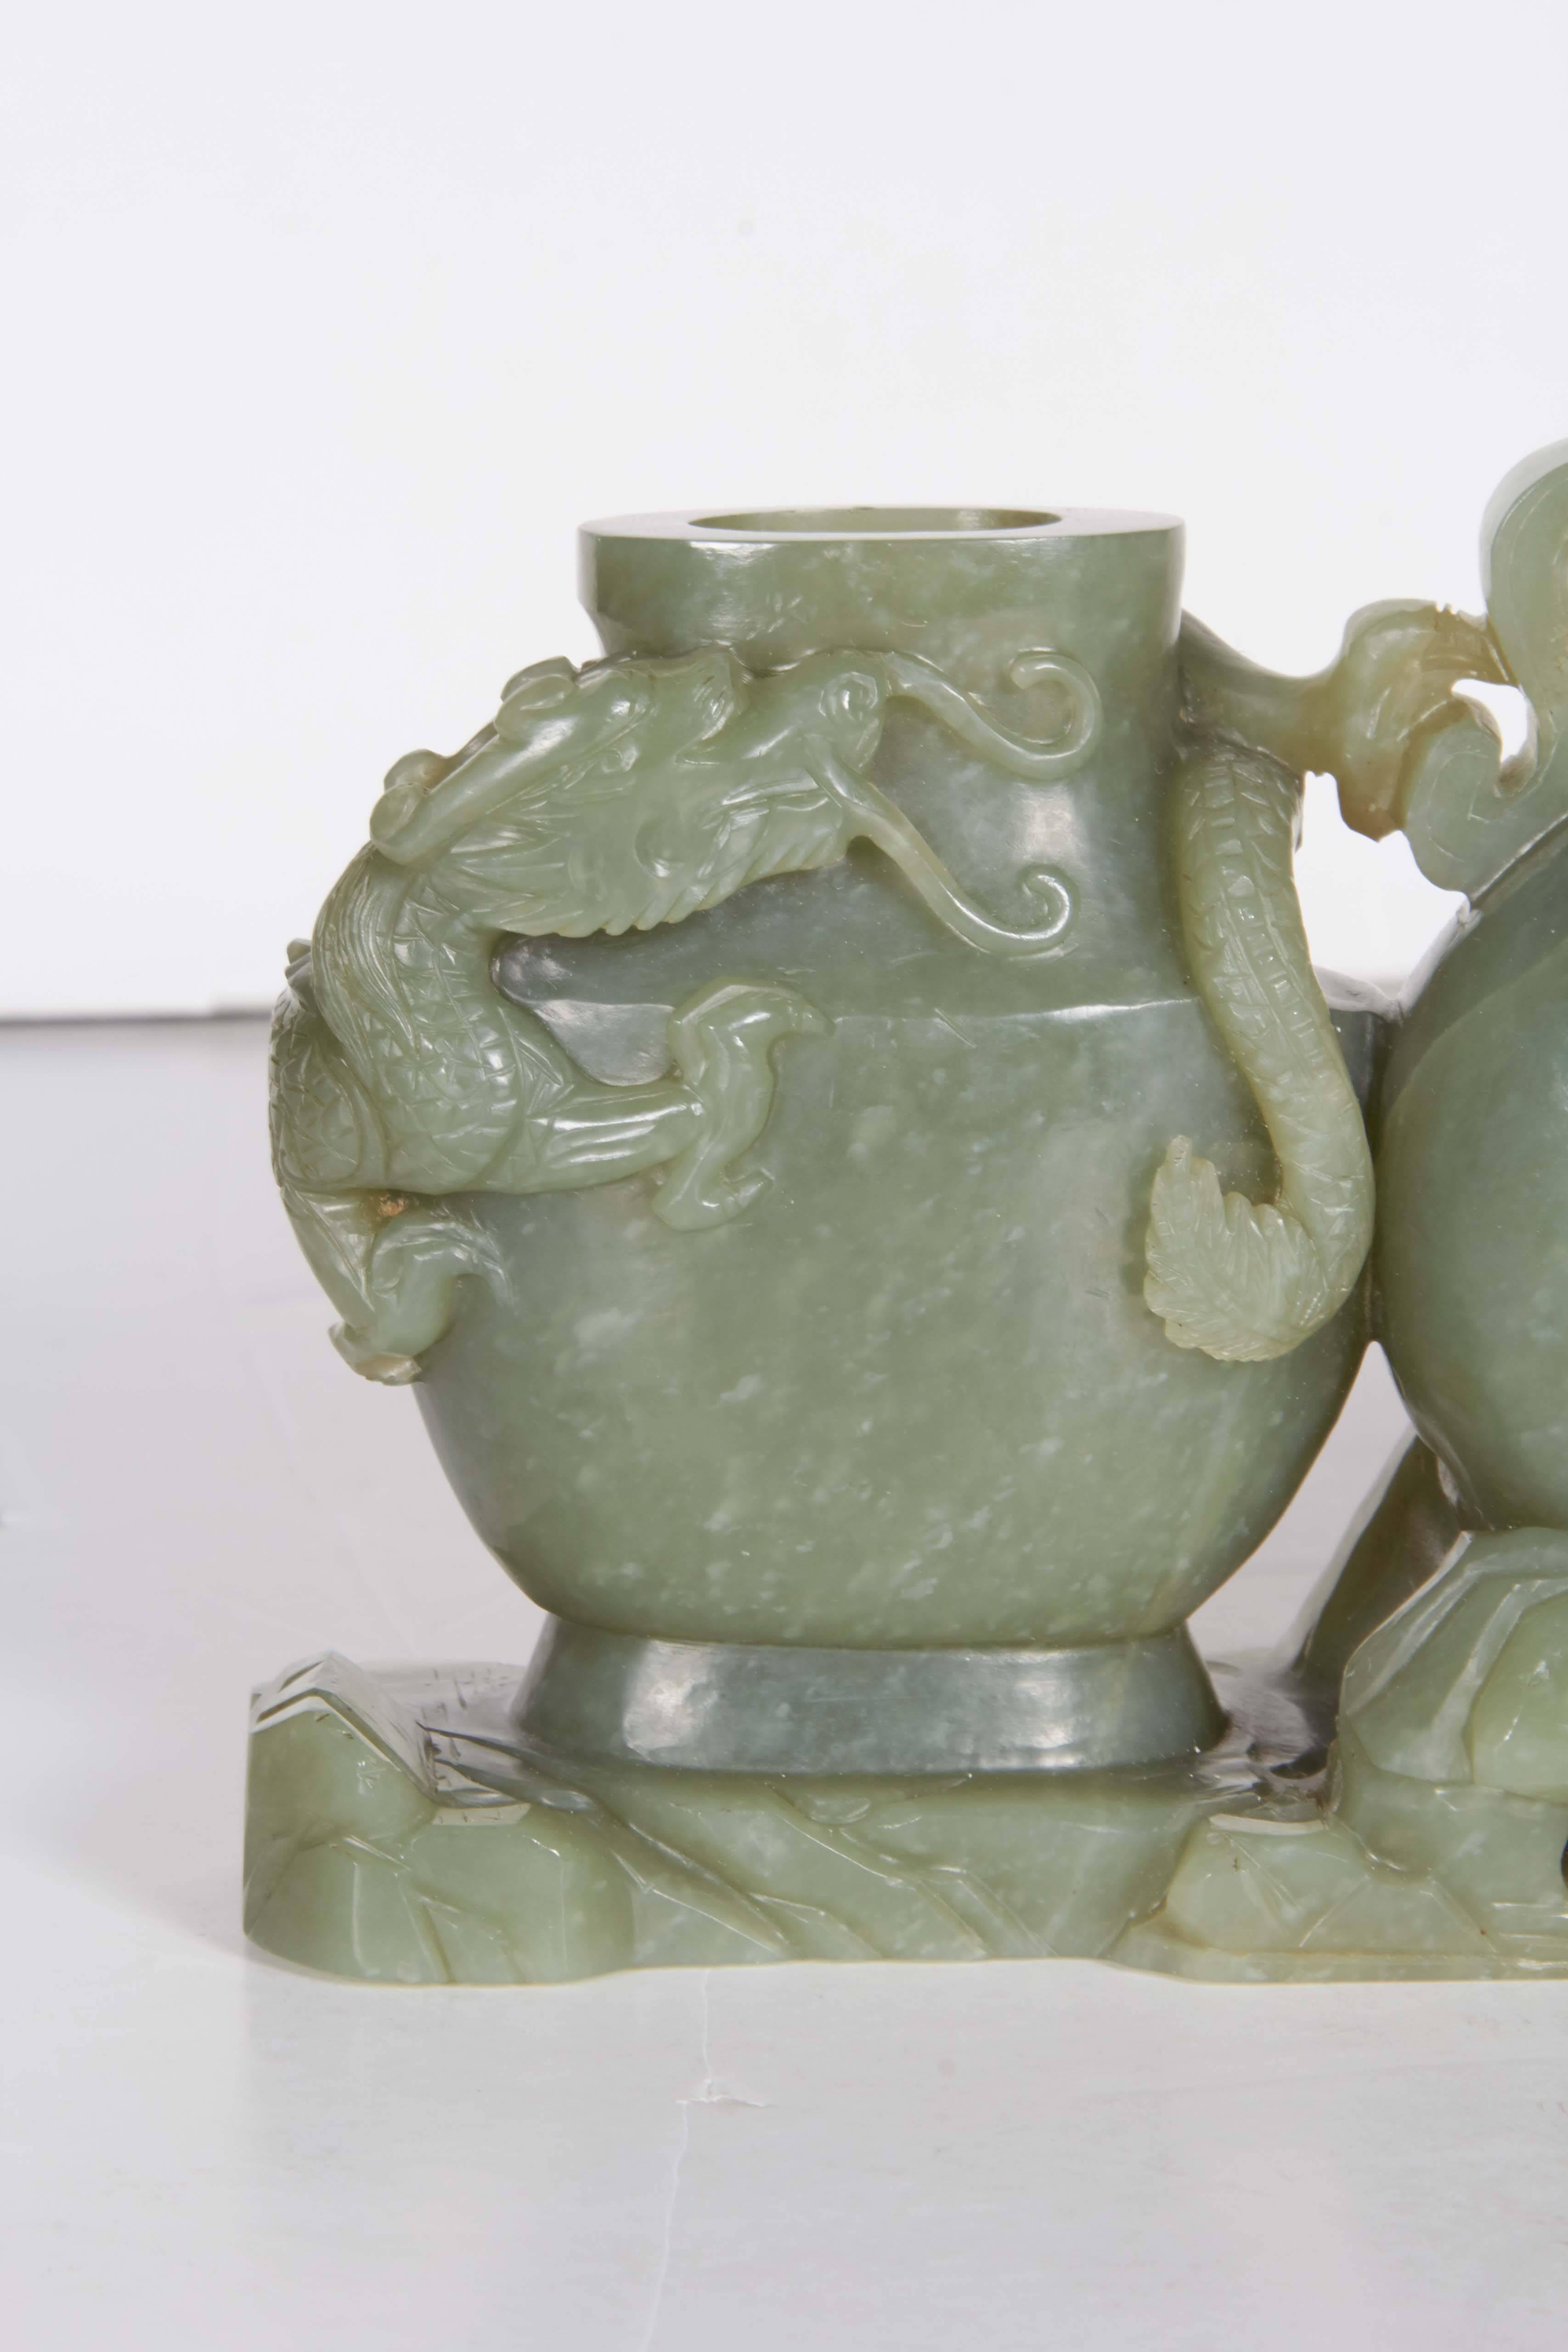 An extremely finely carved antique Chinese Qing dynasty, Celadon green triple vase/brush washer with an Imperial Dragon from behind attacking a bird in front, 18th-19th century, Qing dynasty period.